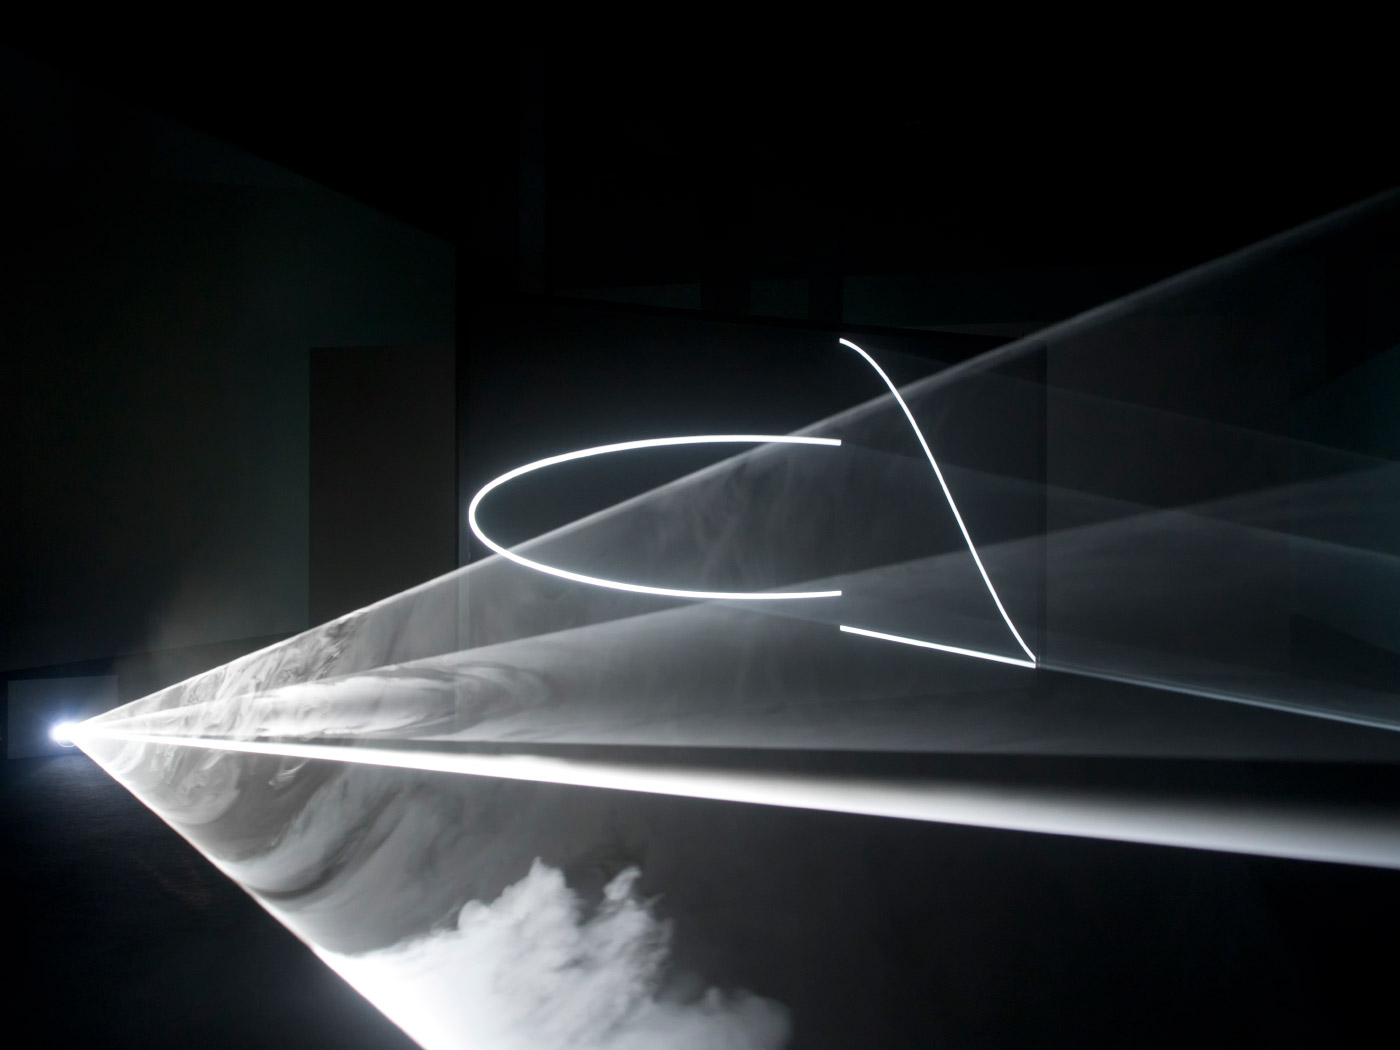 Face to Face, 2013, Anthony McCall. Installation view, LAC, Lugano, 2015.